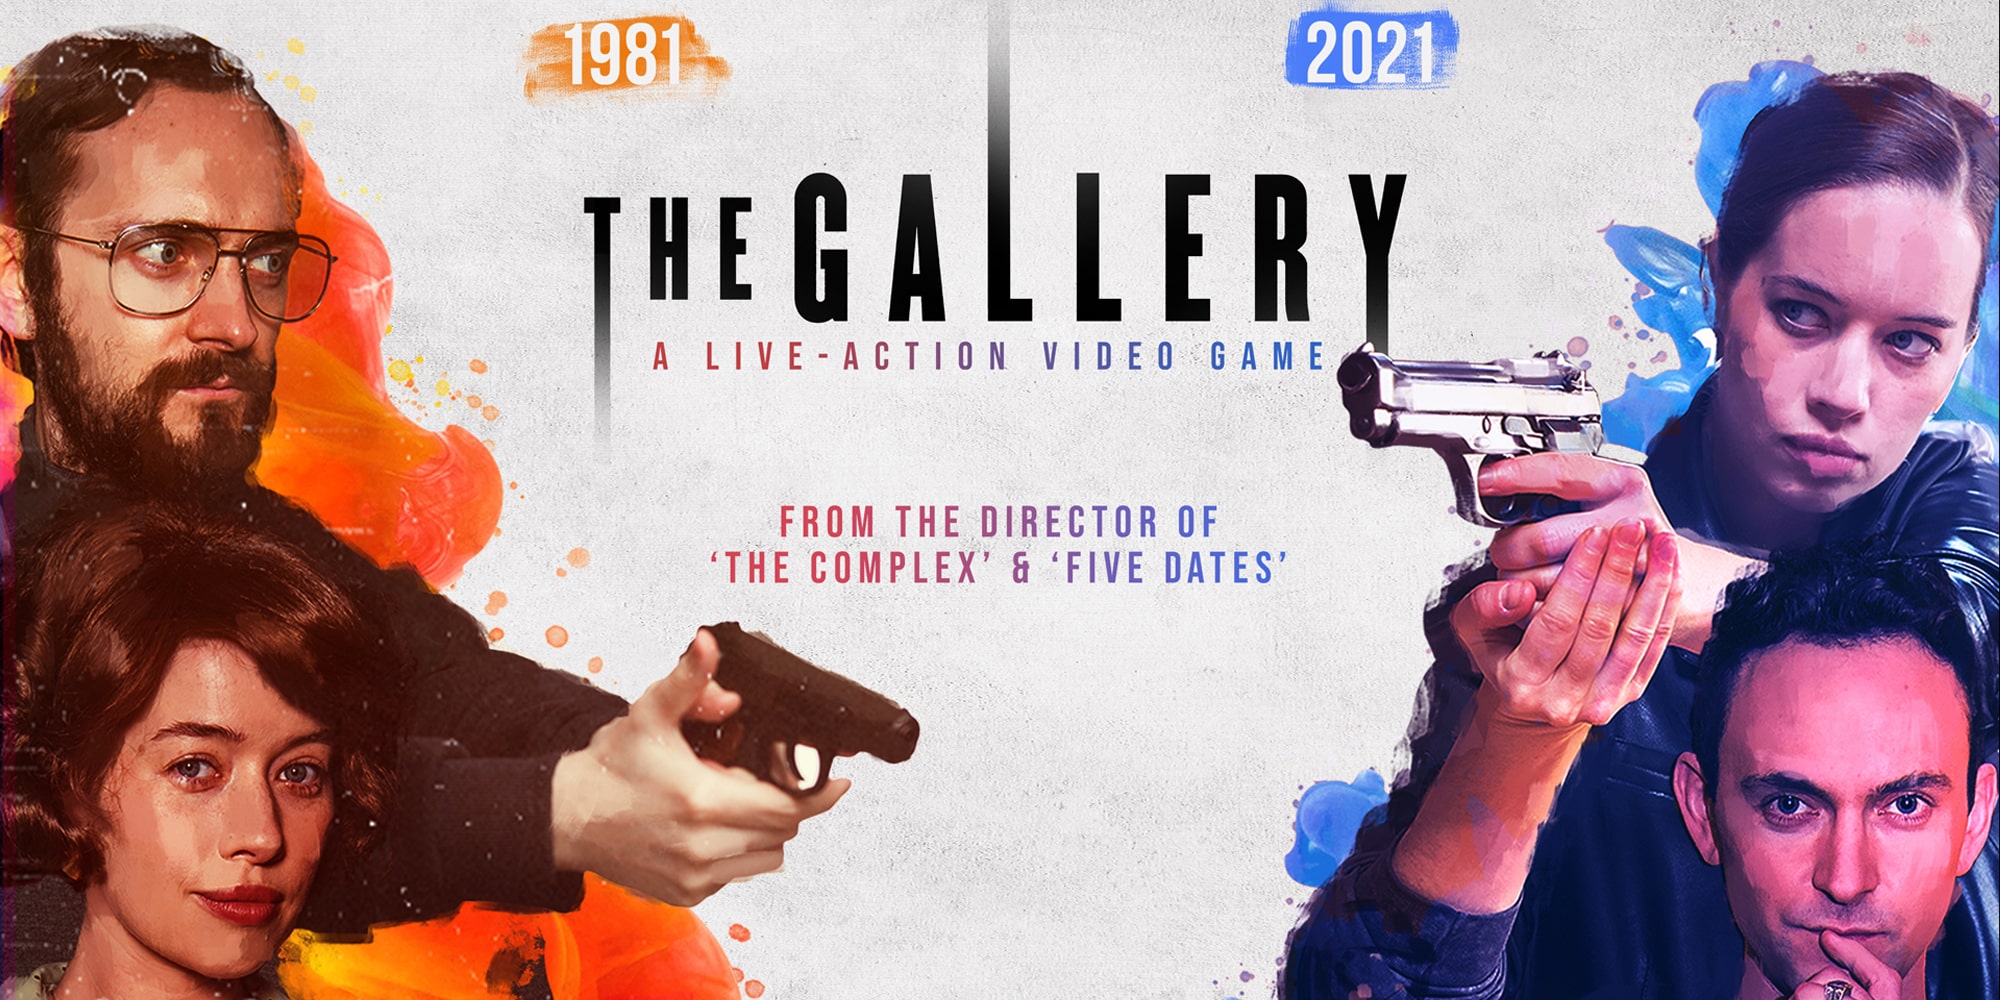 The Guardian on ‘The Gallery’ : Viewers can choose the outcome of the characters in this cleverly assembled art-world thriller available on PC, console and your local screen